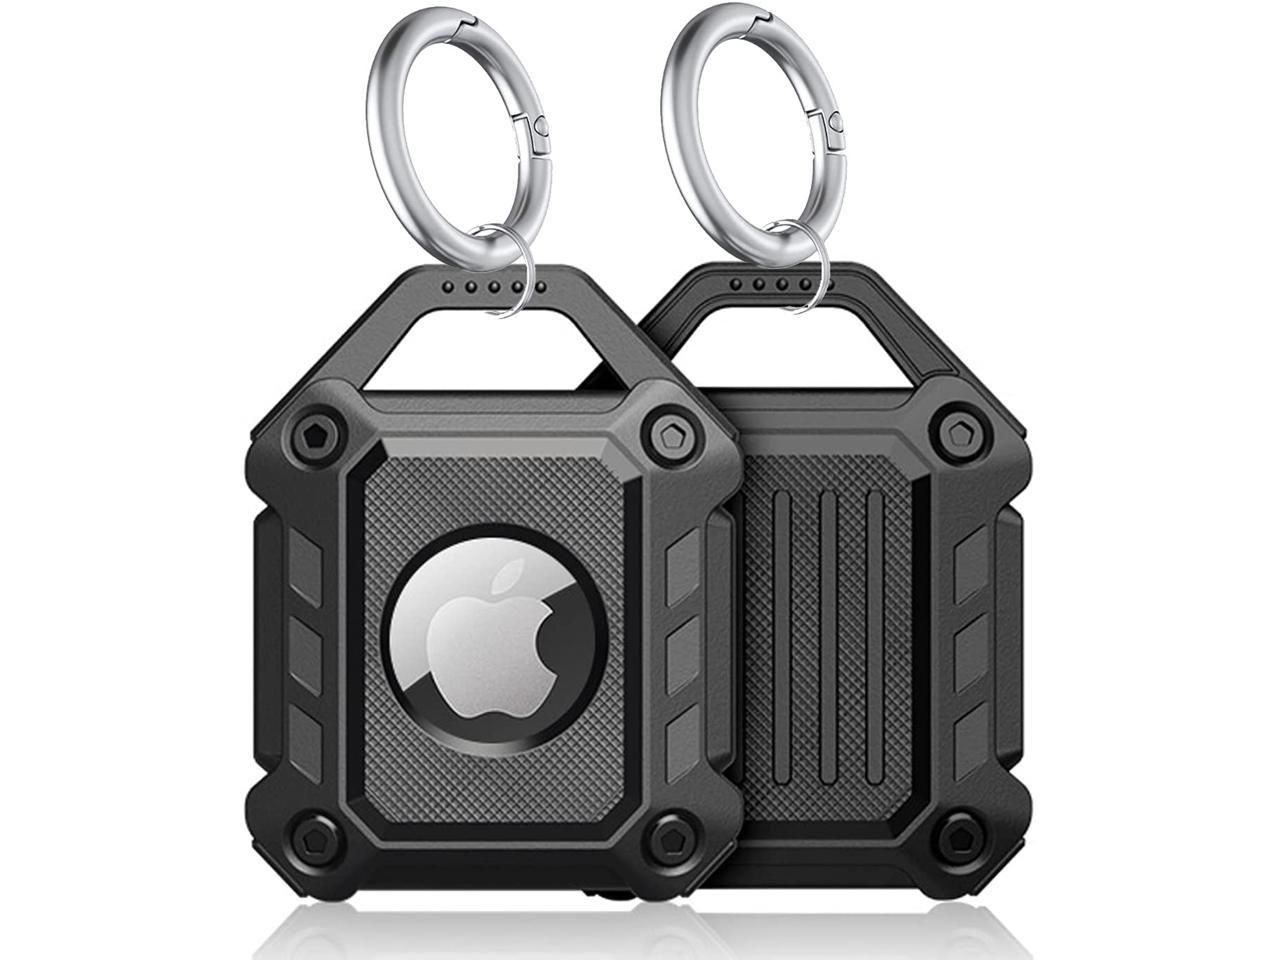 Black 2 Pack Waterproof Air Tag Keychain Case for Apple Airtags Holder,Full-Body Shockproof,Anti-Scratch,Soft,Light Weight,Easy Installation 